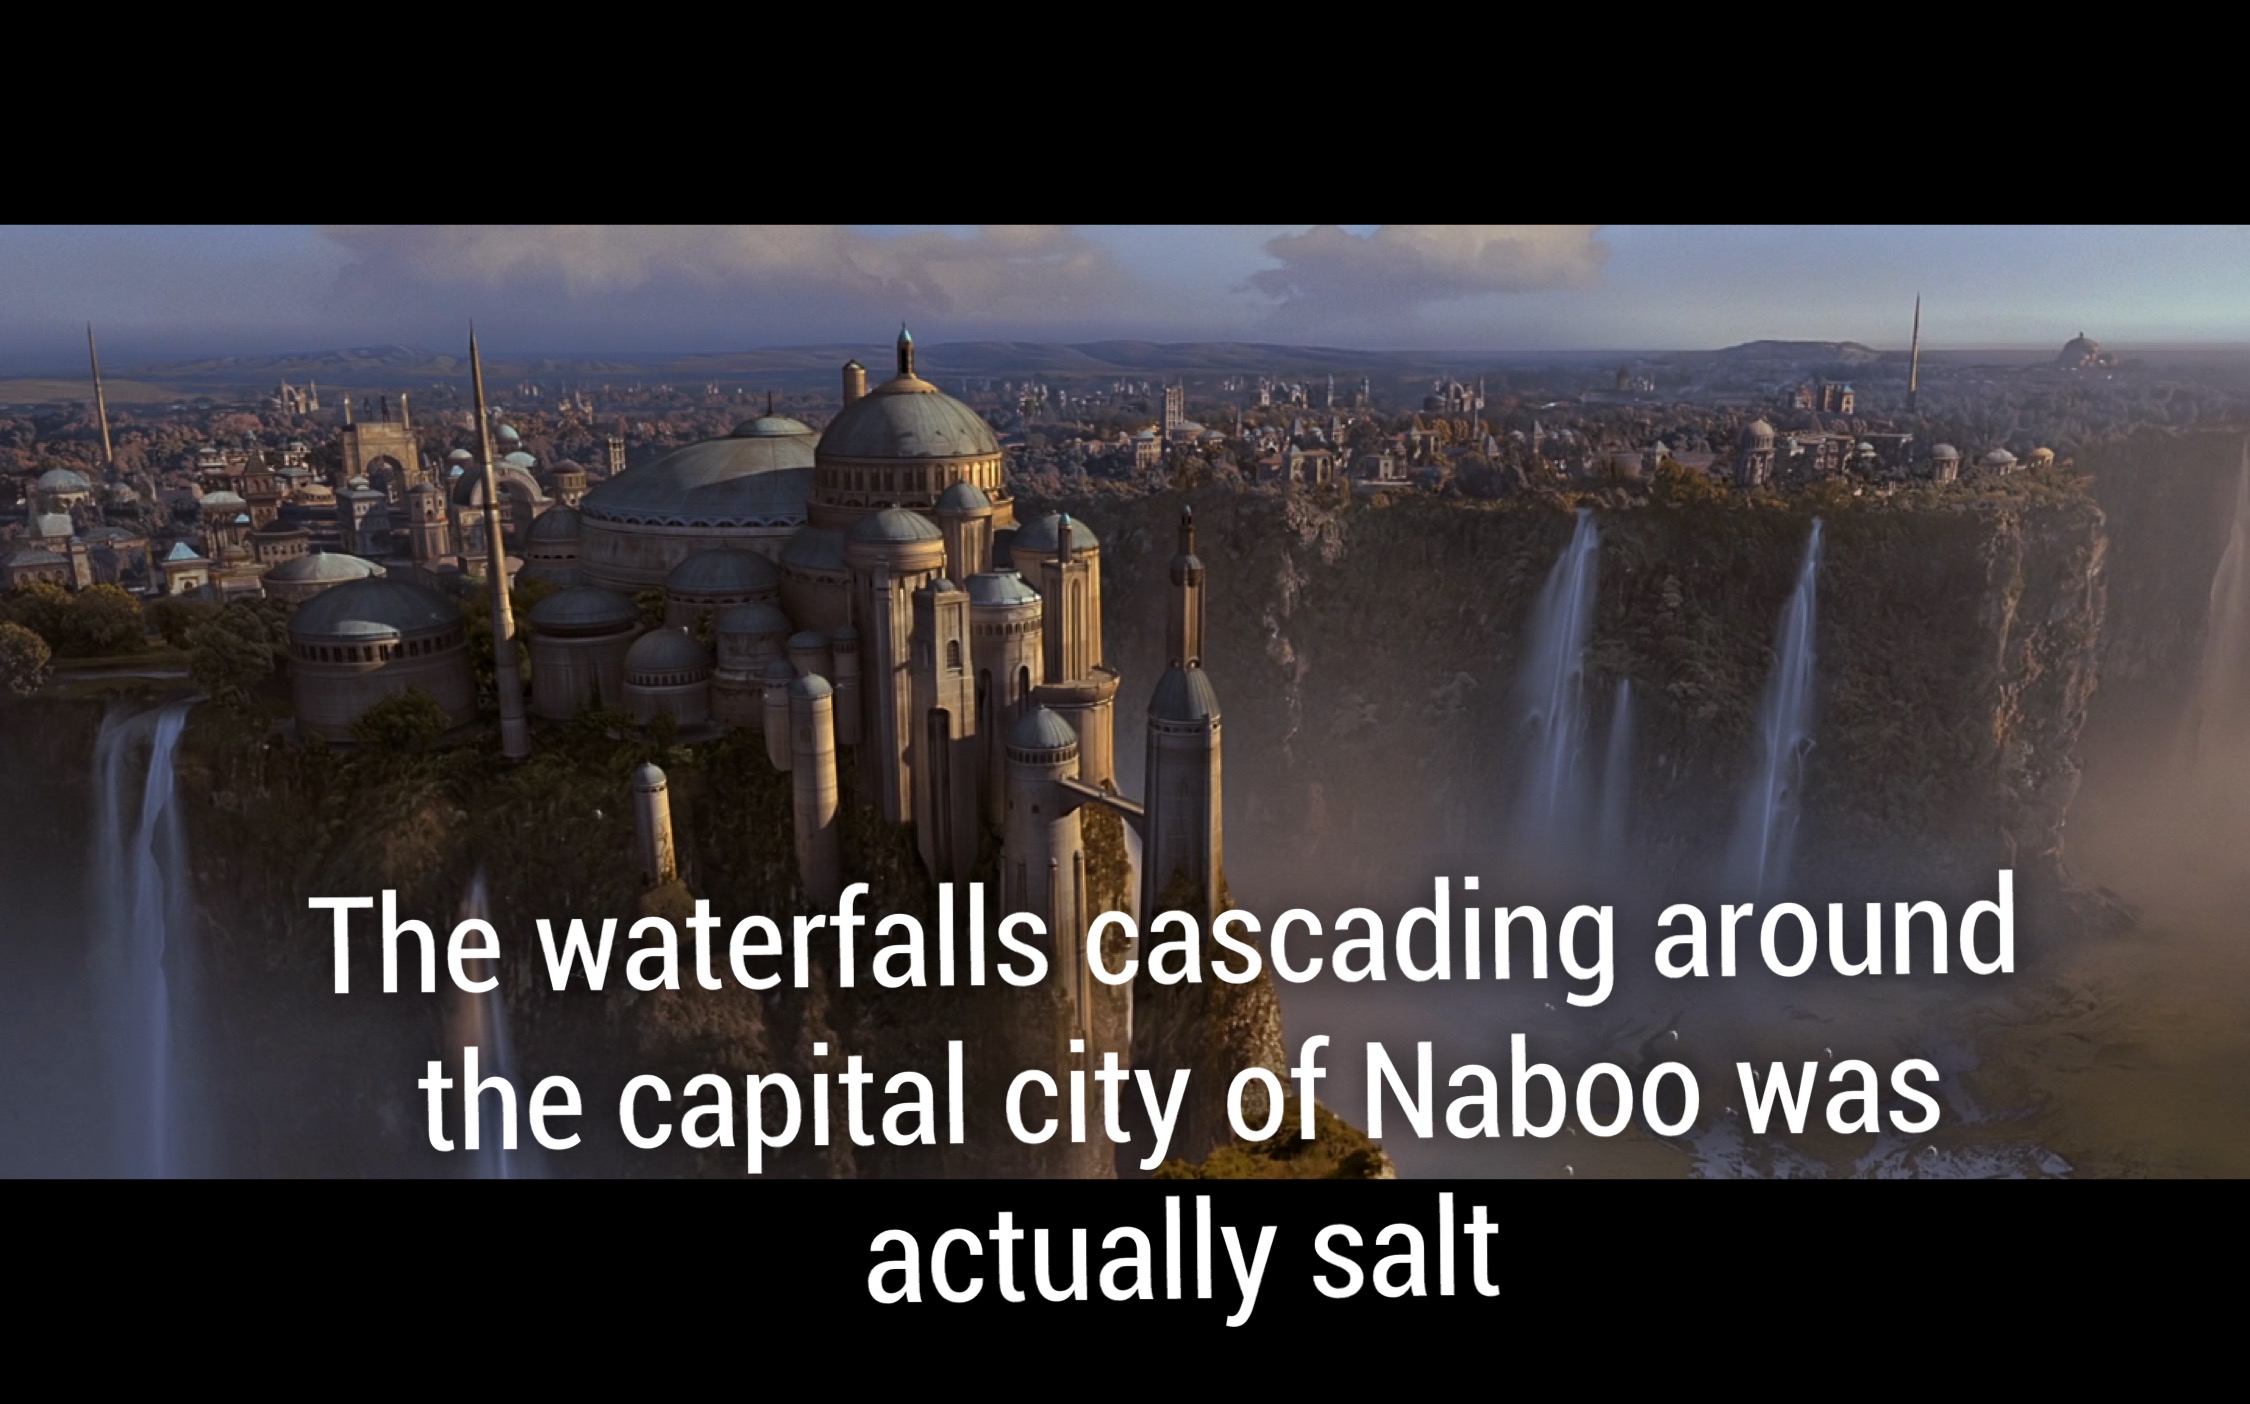 star wars naboo - The waterfalls cascading around the capital city of Naboo was actually salt